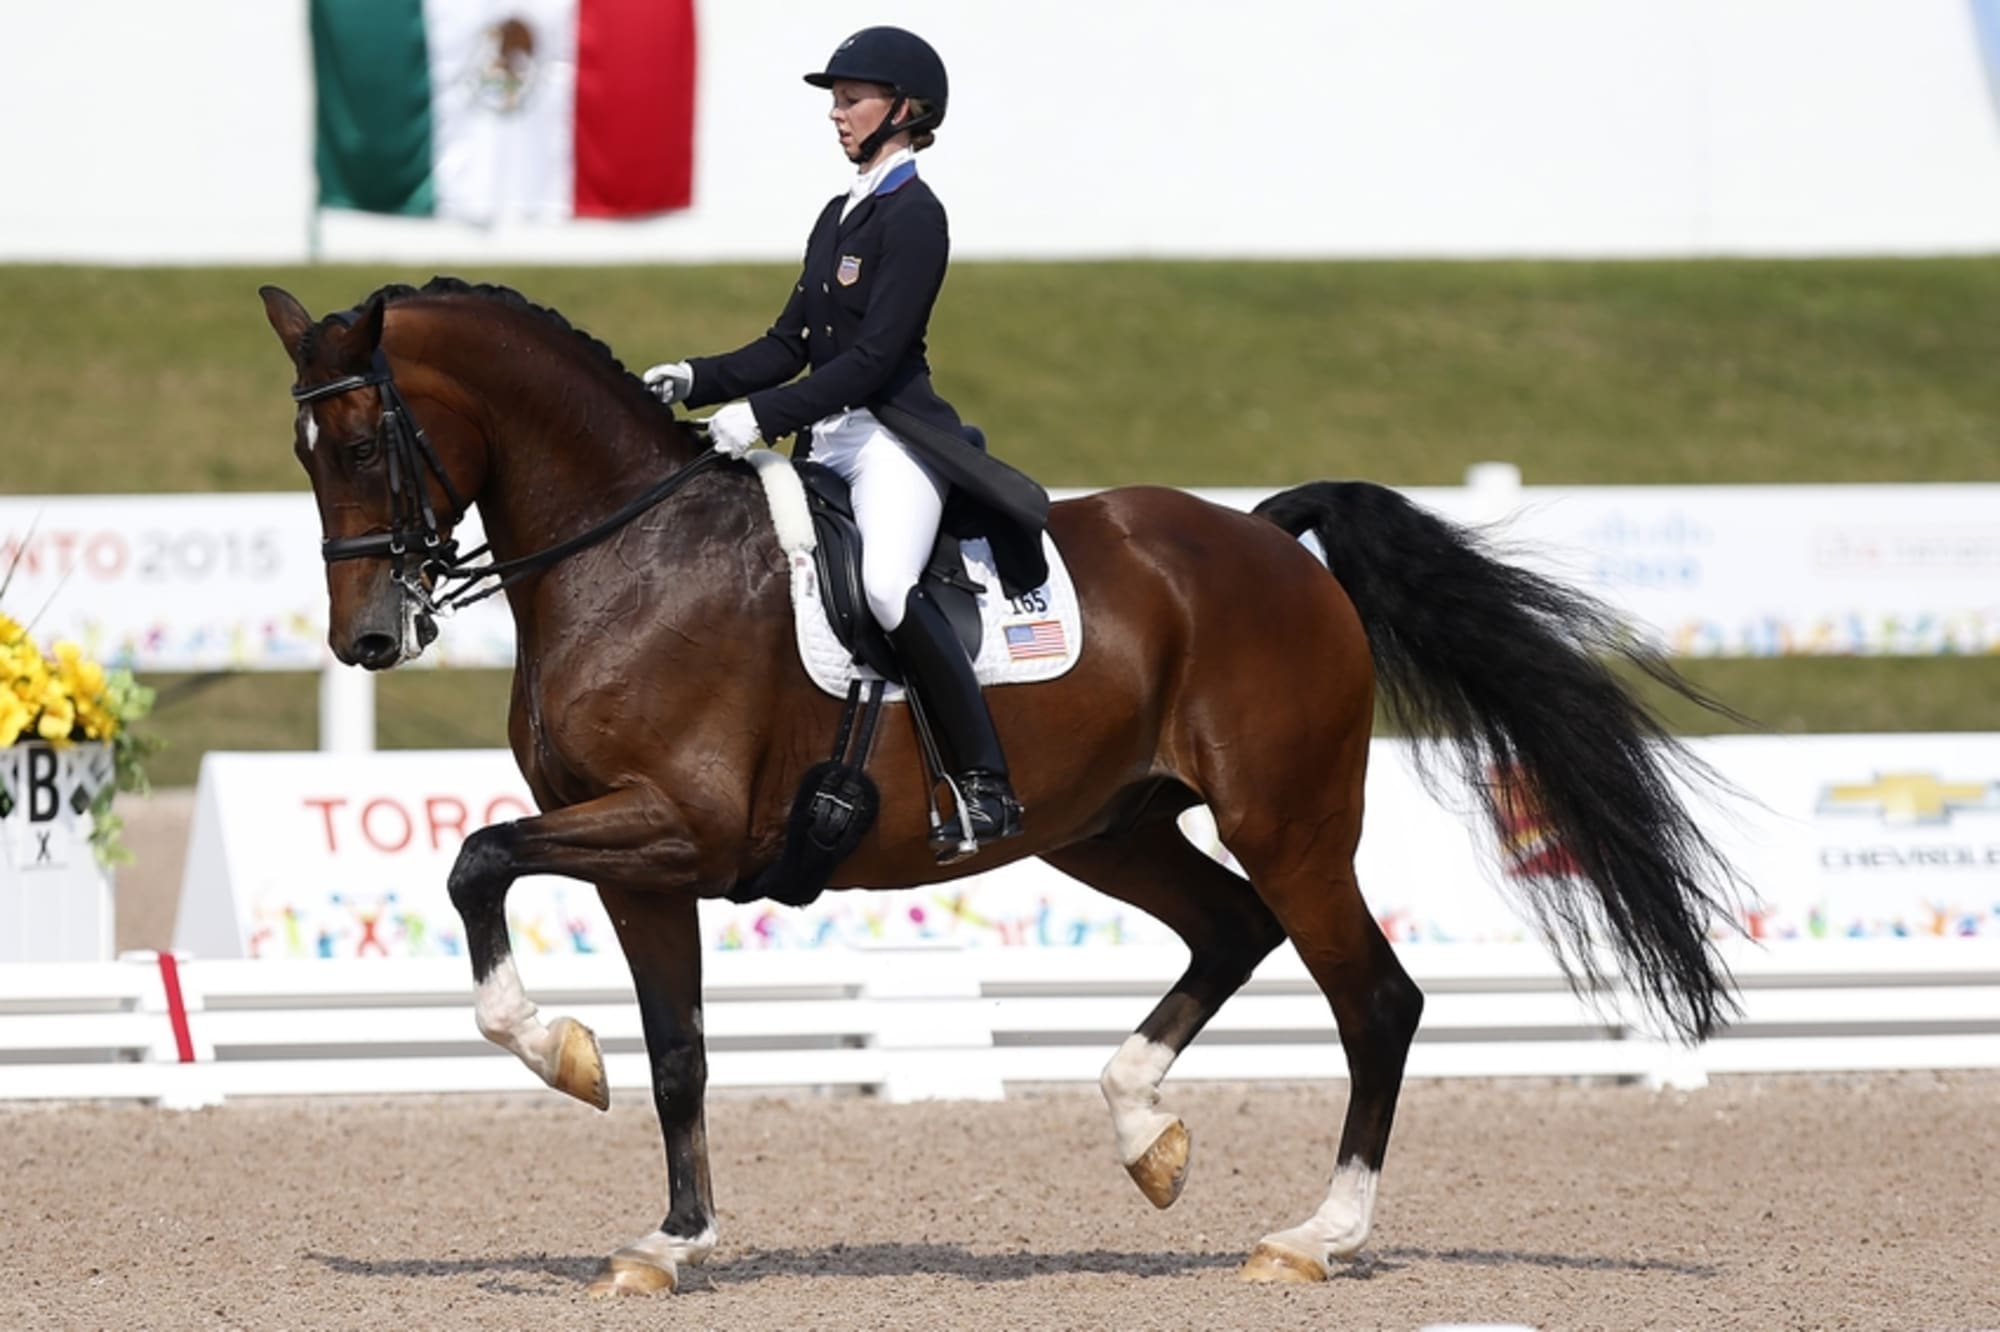 Olympic equestrian dressage grand prix results August 11